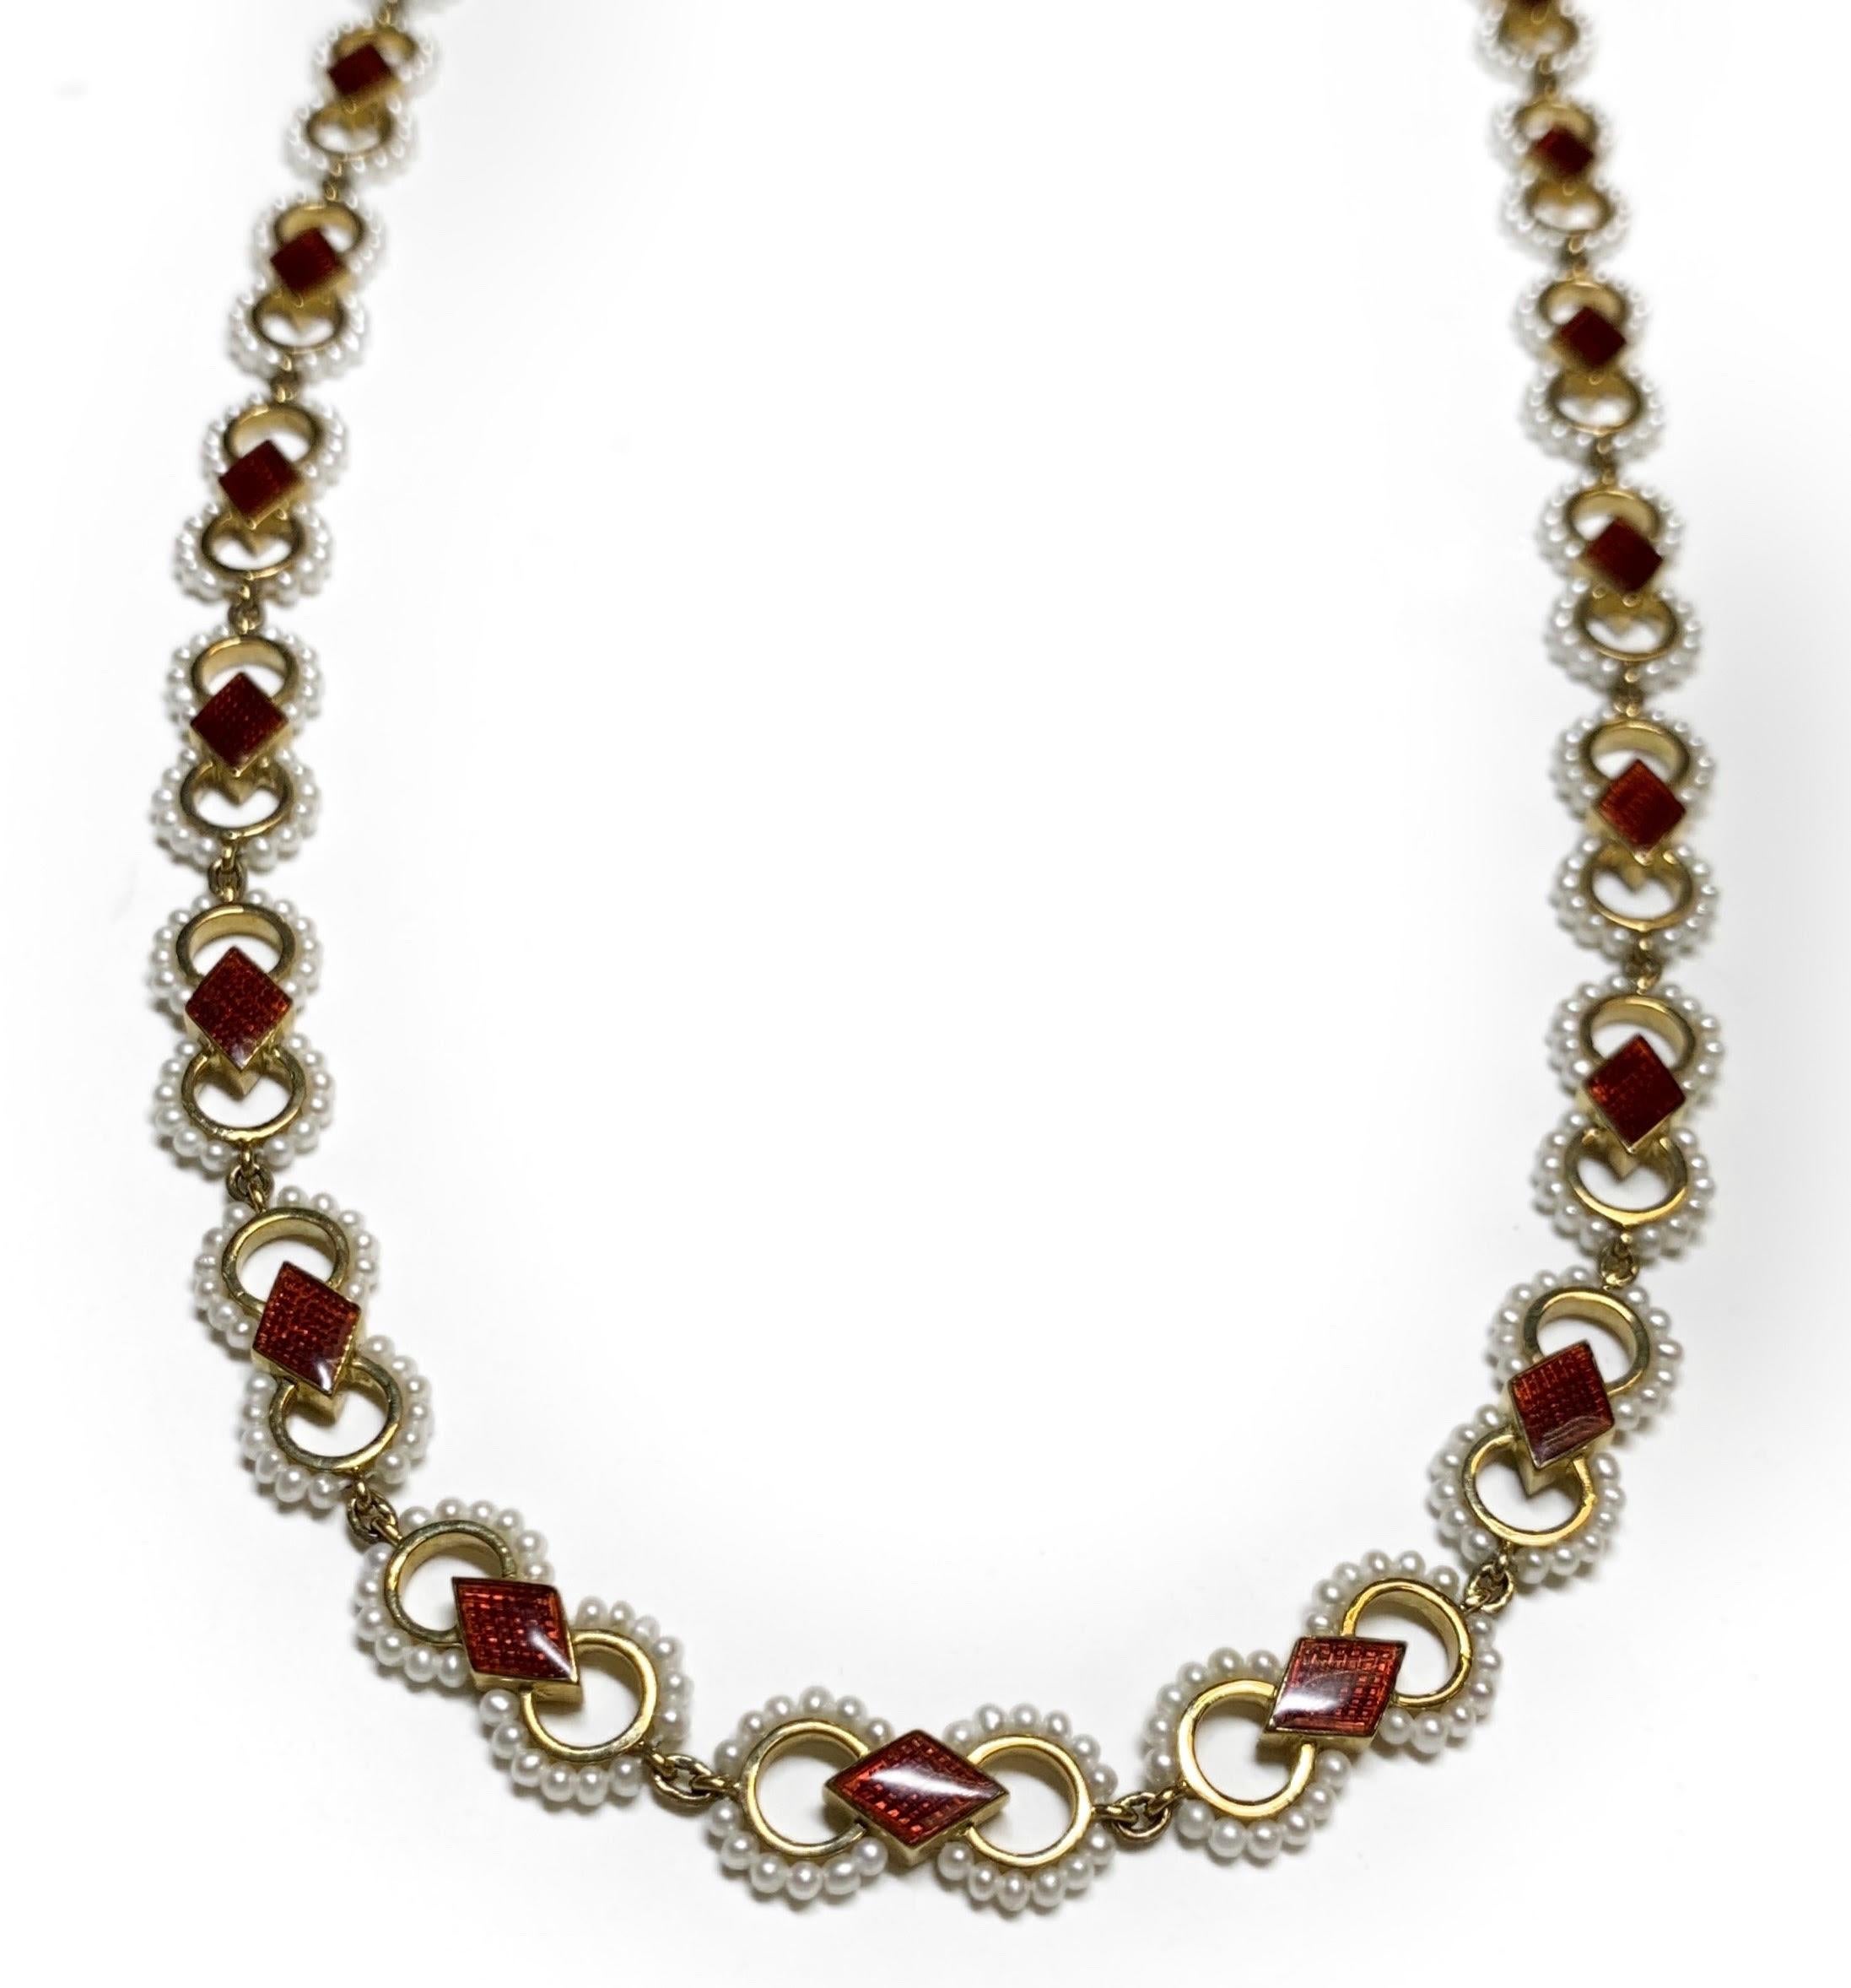 Seed Pearl and Red Enamel Necklace
18 Karat Yellow Gold
Pearls weighing 13.90 carats 